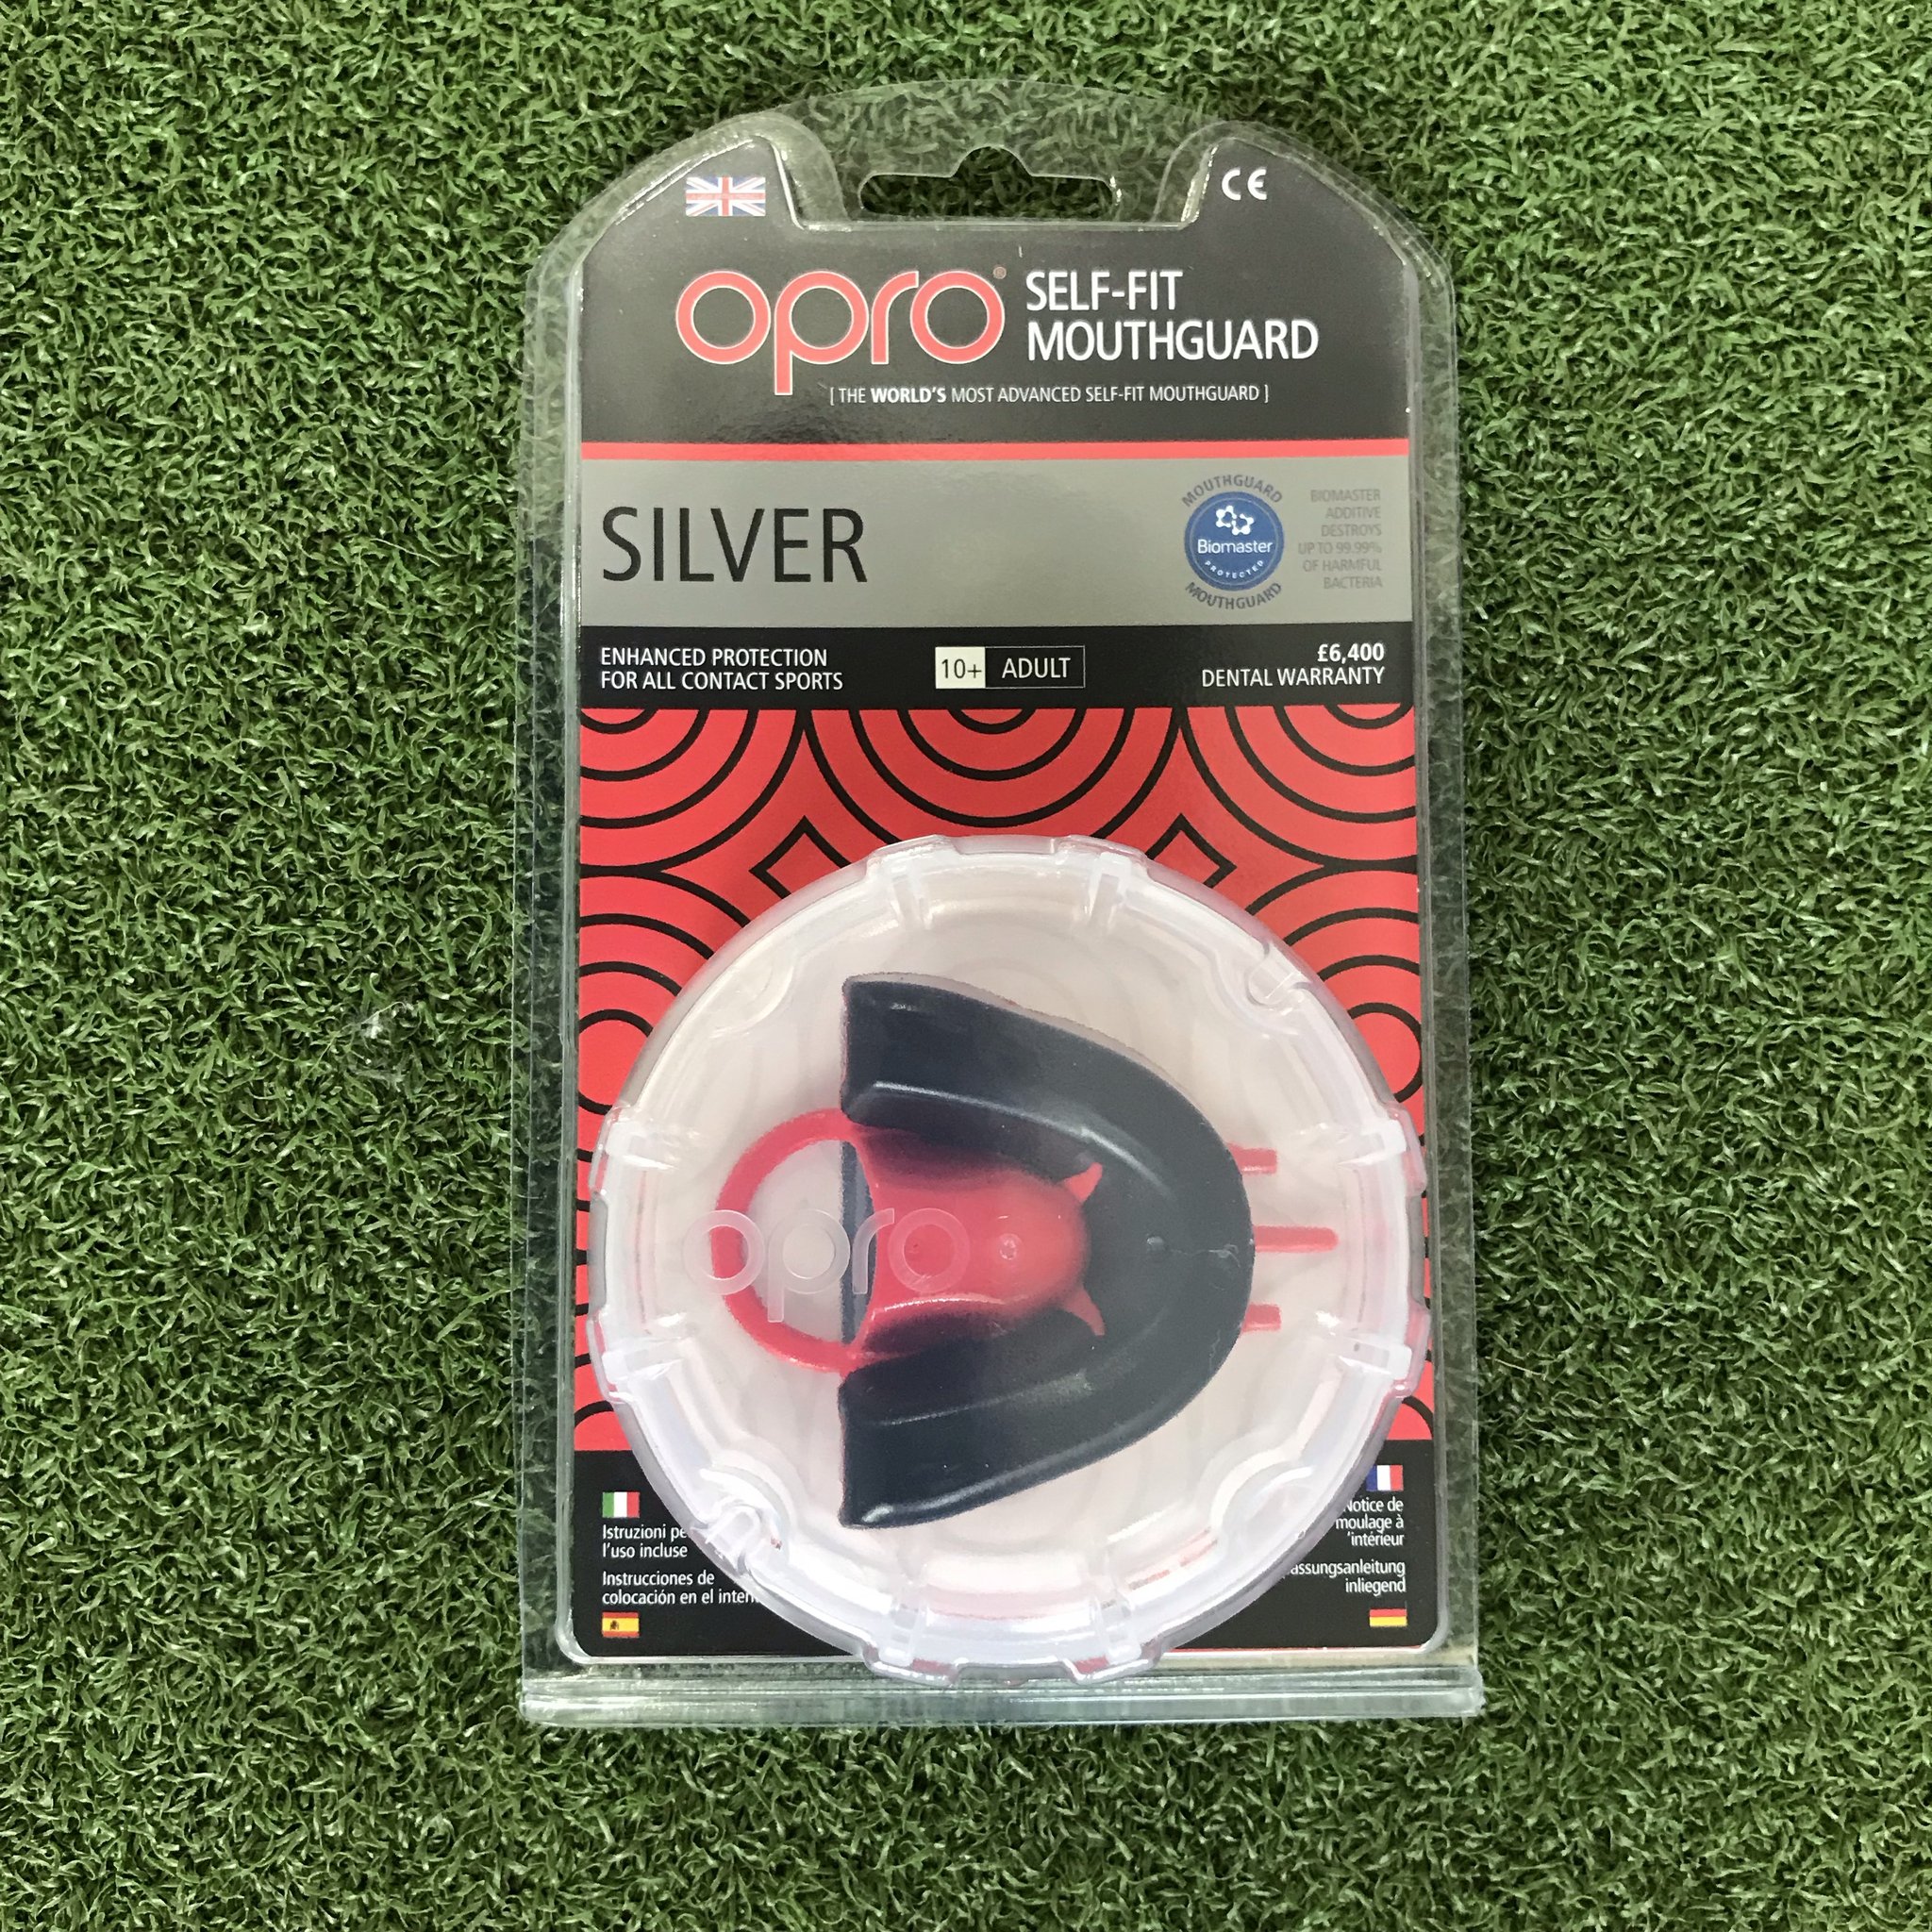 OPROshield Silver Mouthguard